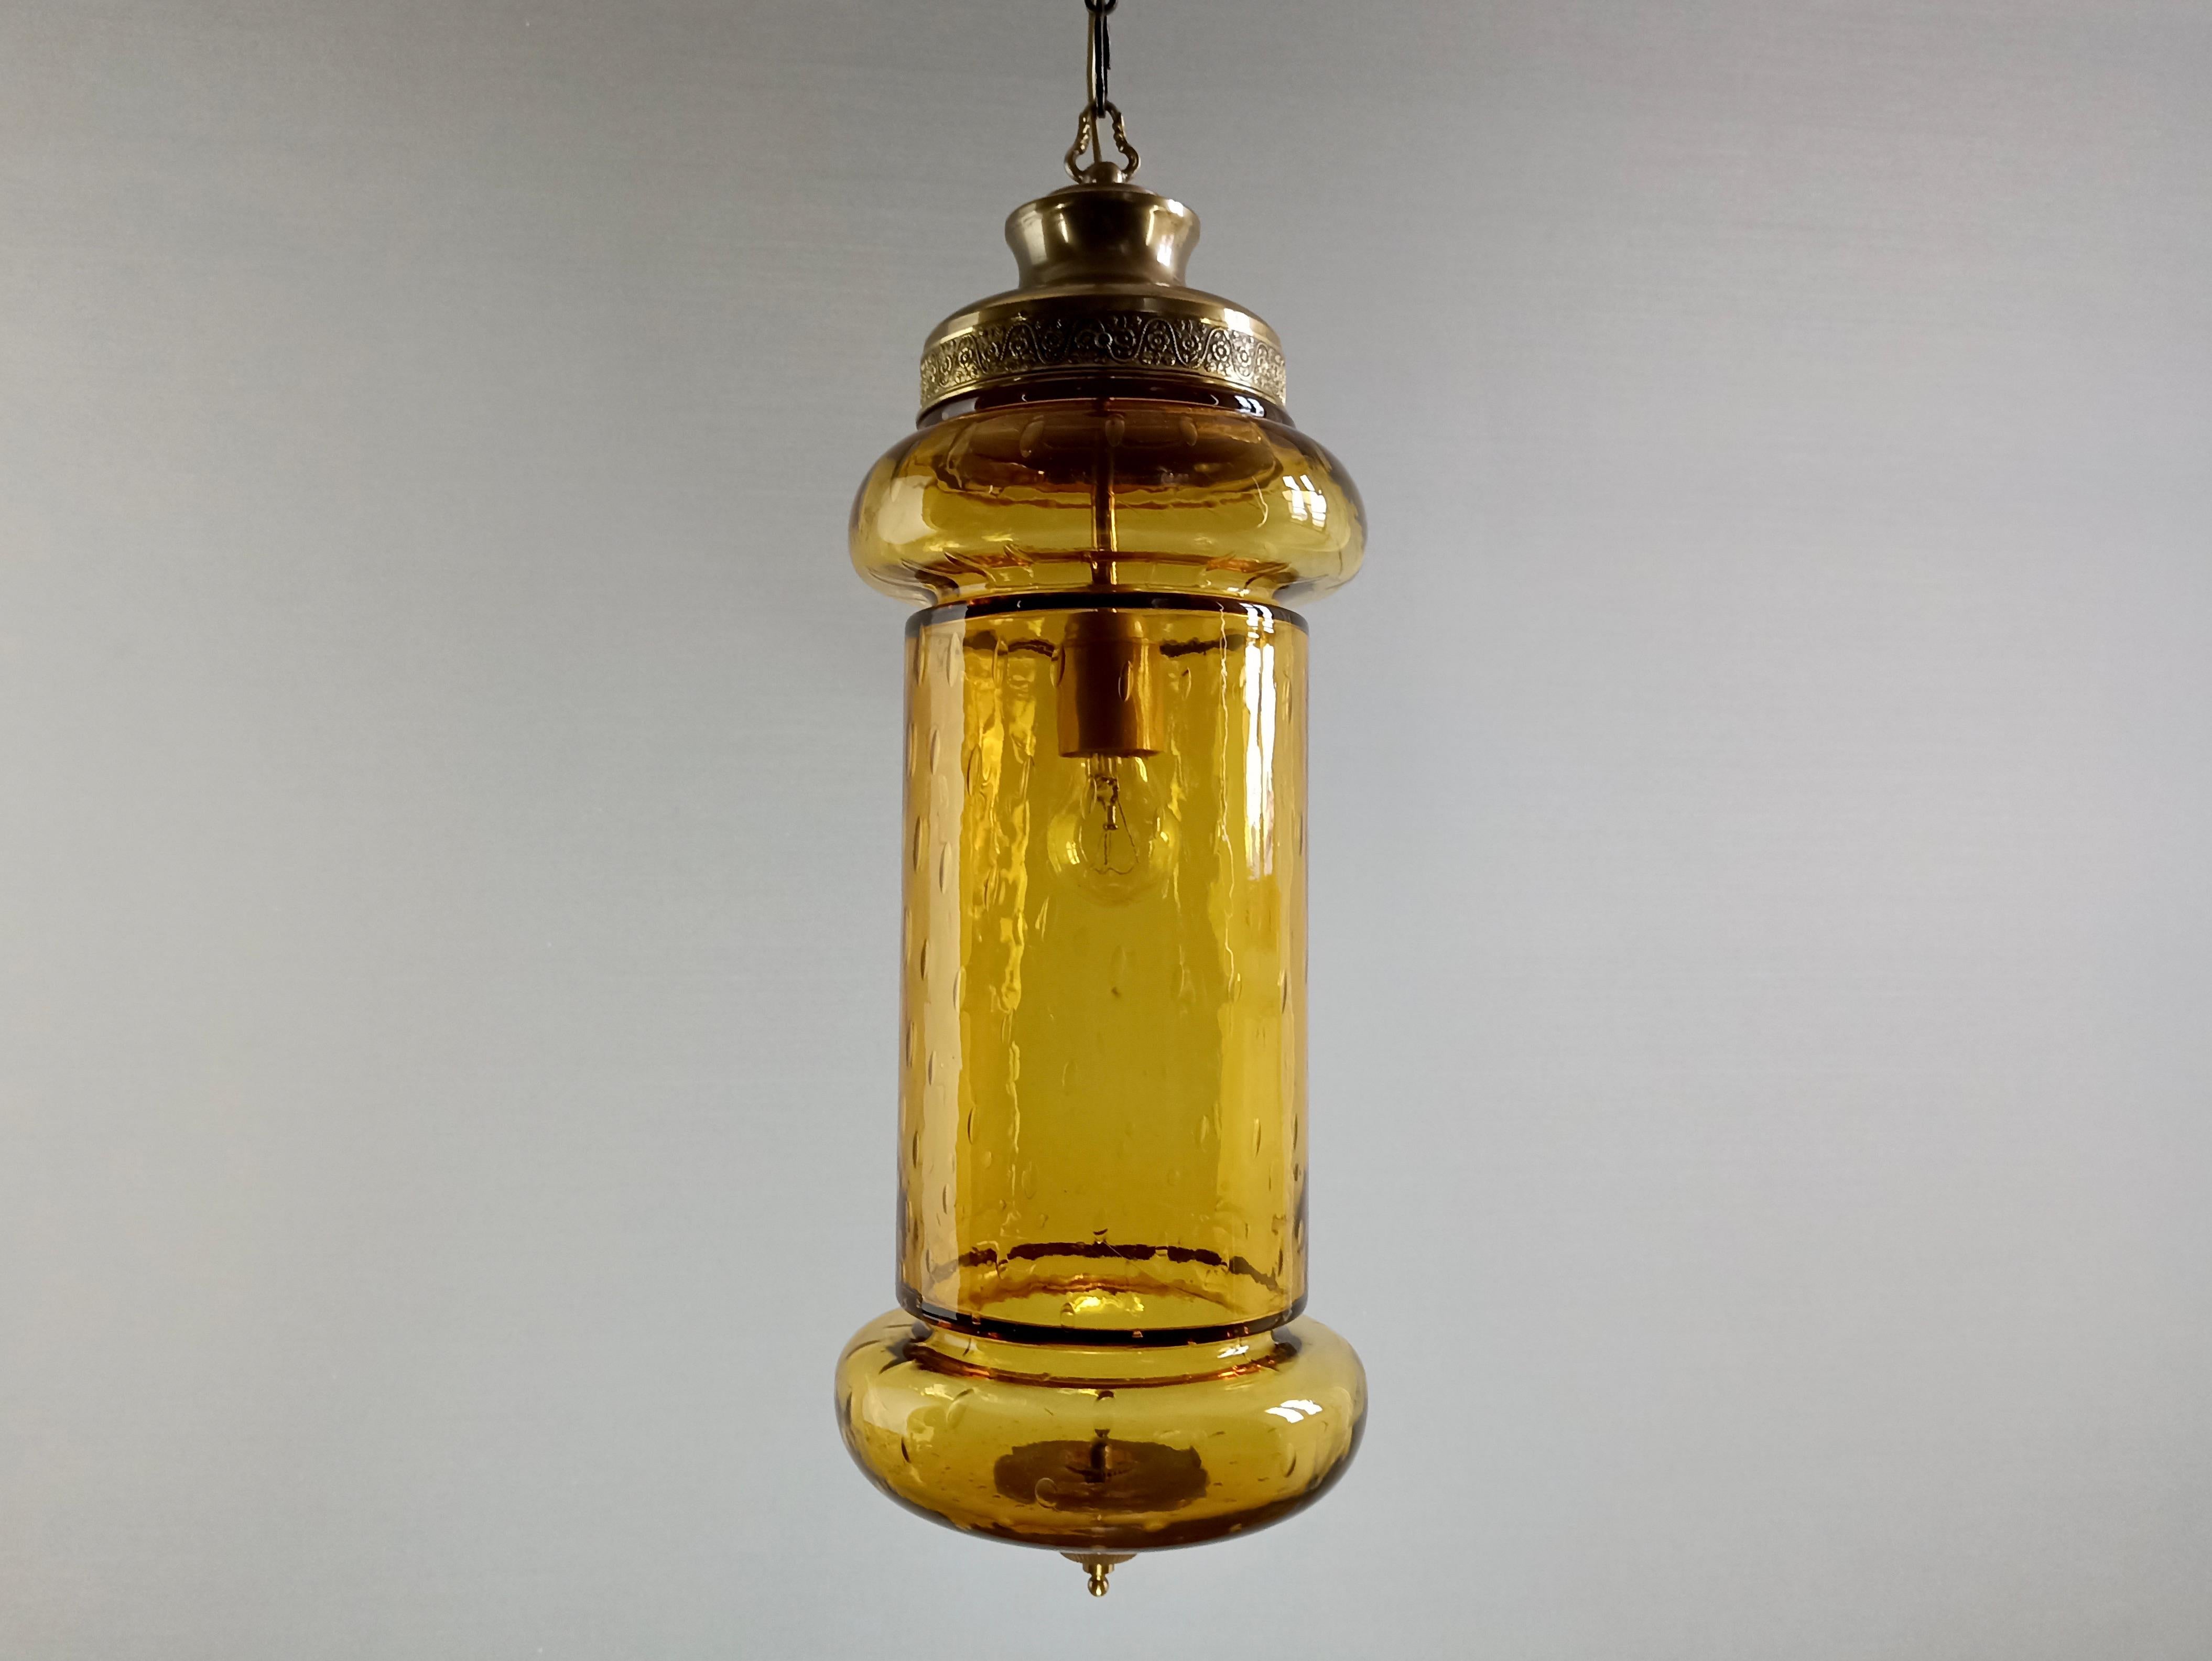 Very distinctive and impressive Murano hand-blown glass one-light ceiling lantern from the 1950s! 
The lantern consists of a thick yellow/gold blown glass body with the particular Bulicante workmanship. 
The frame is made of brass and has a